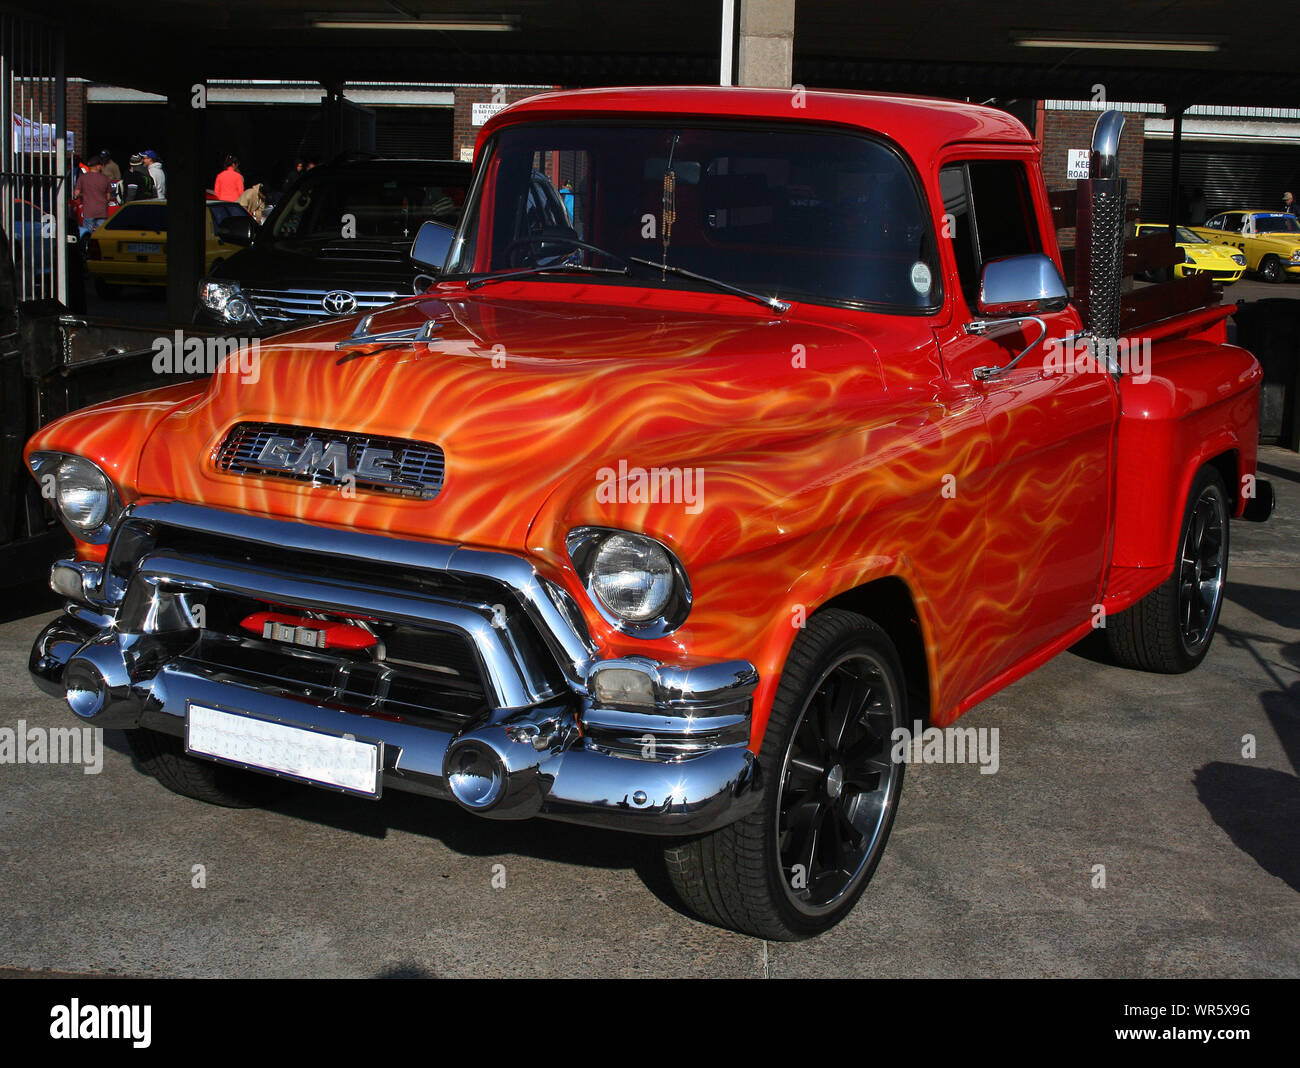 1957 Chevrolet Task Force on display, South Africa Stock Photo